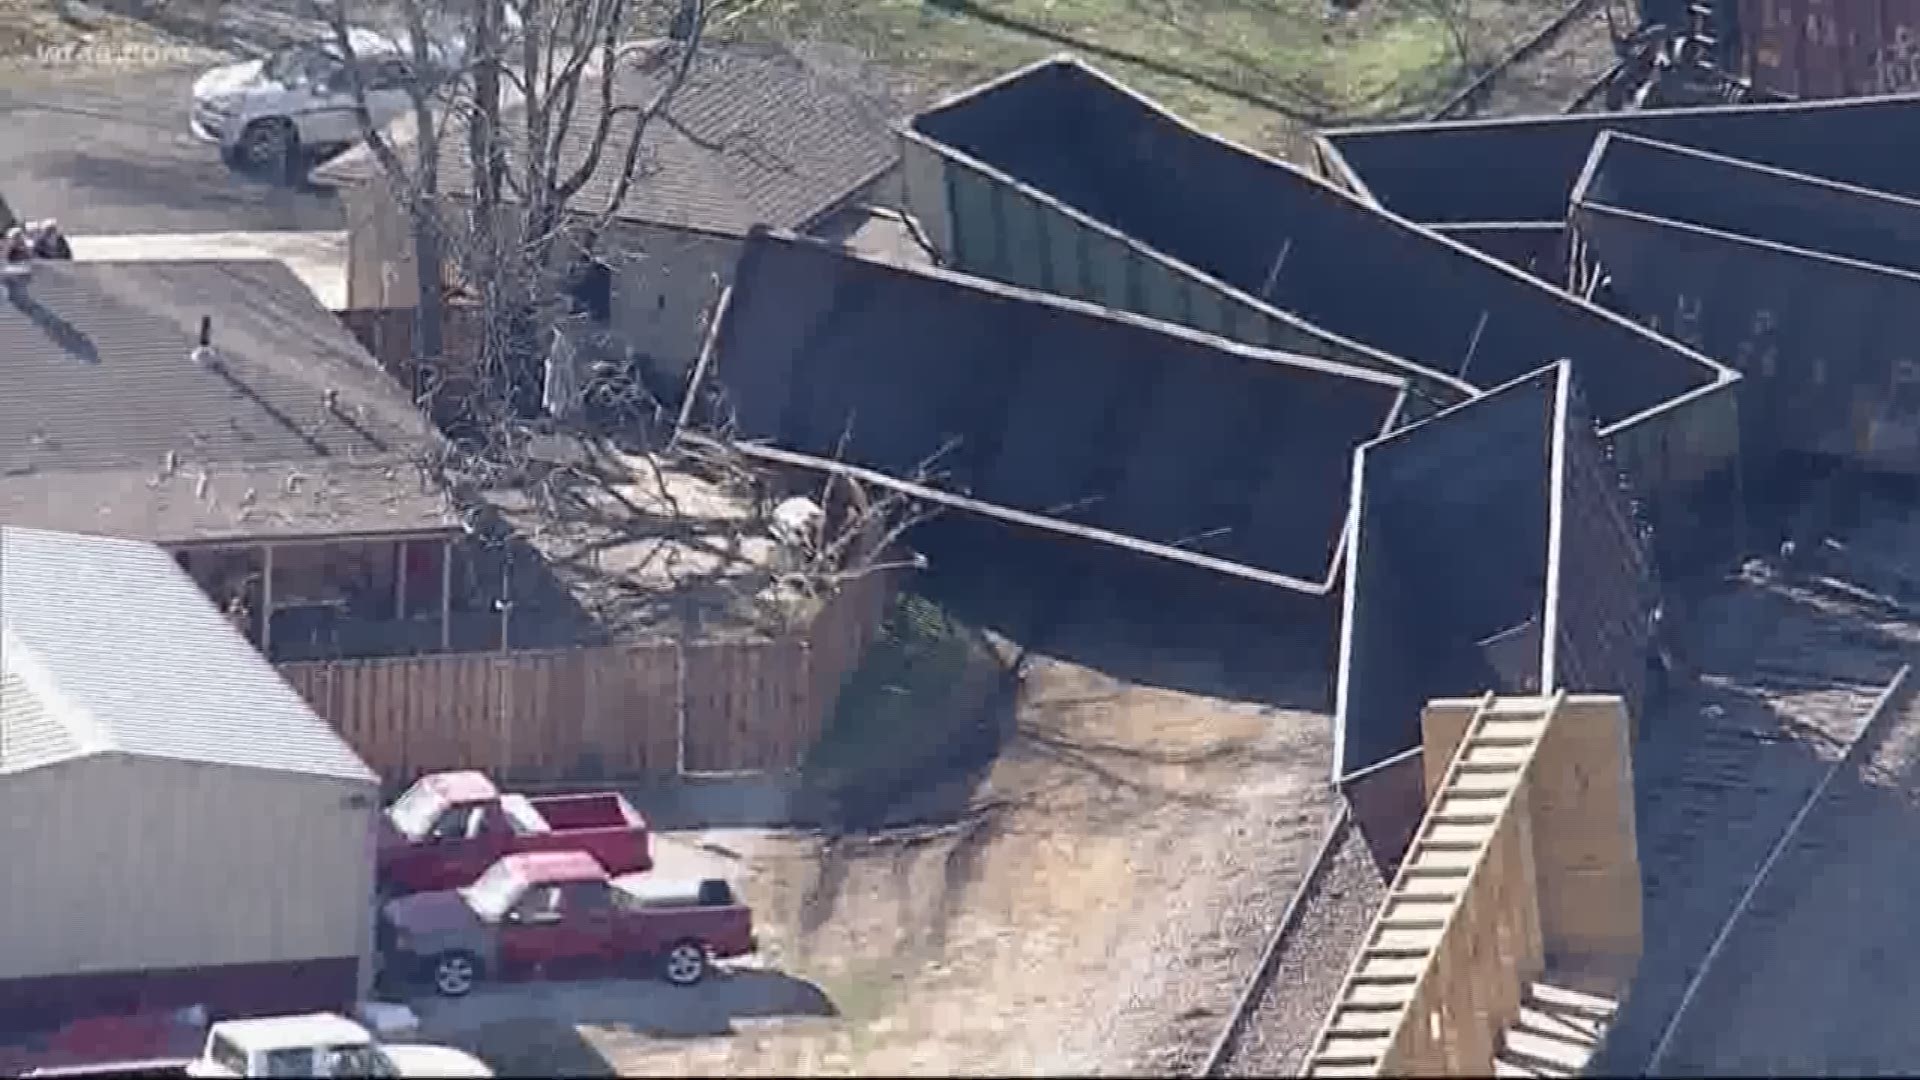 No one was injured, but several railcars ended up in a backyard in Aubrey, Union Pacific officials said.